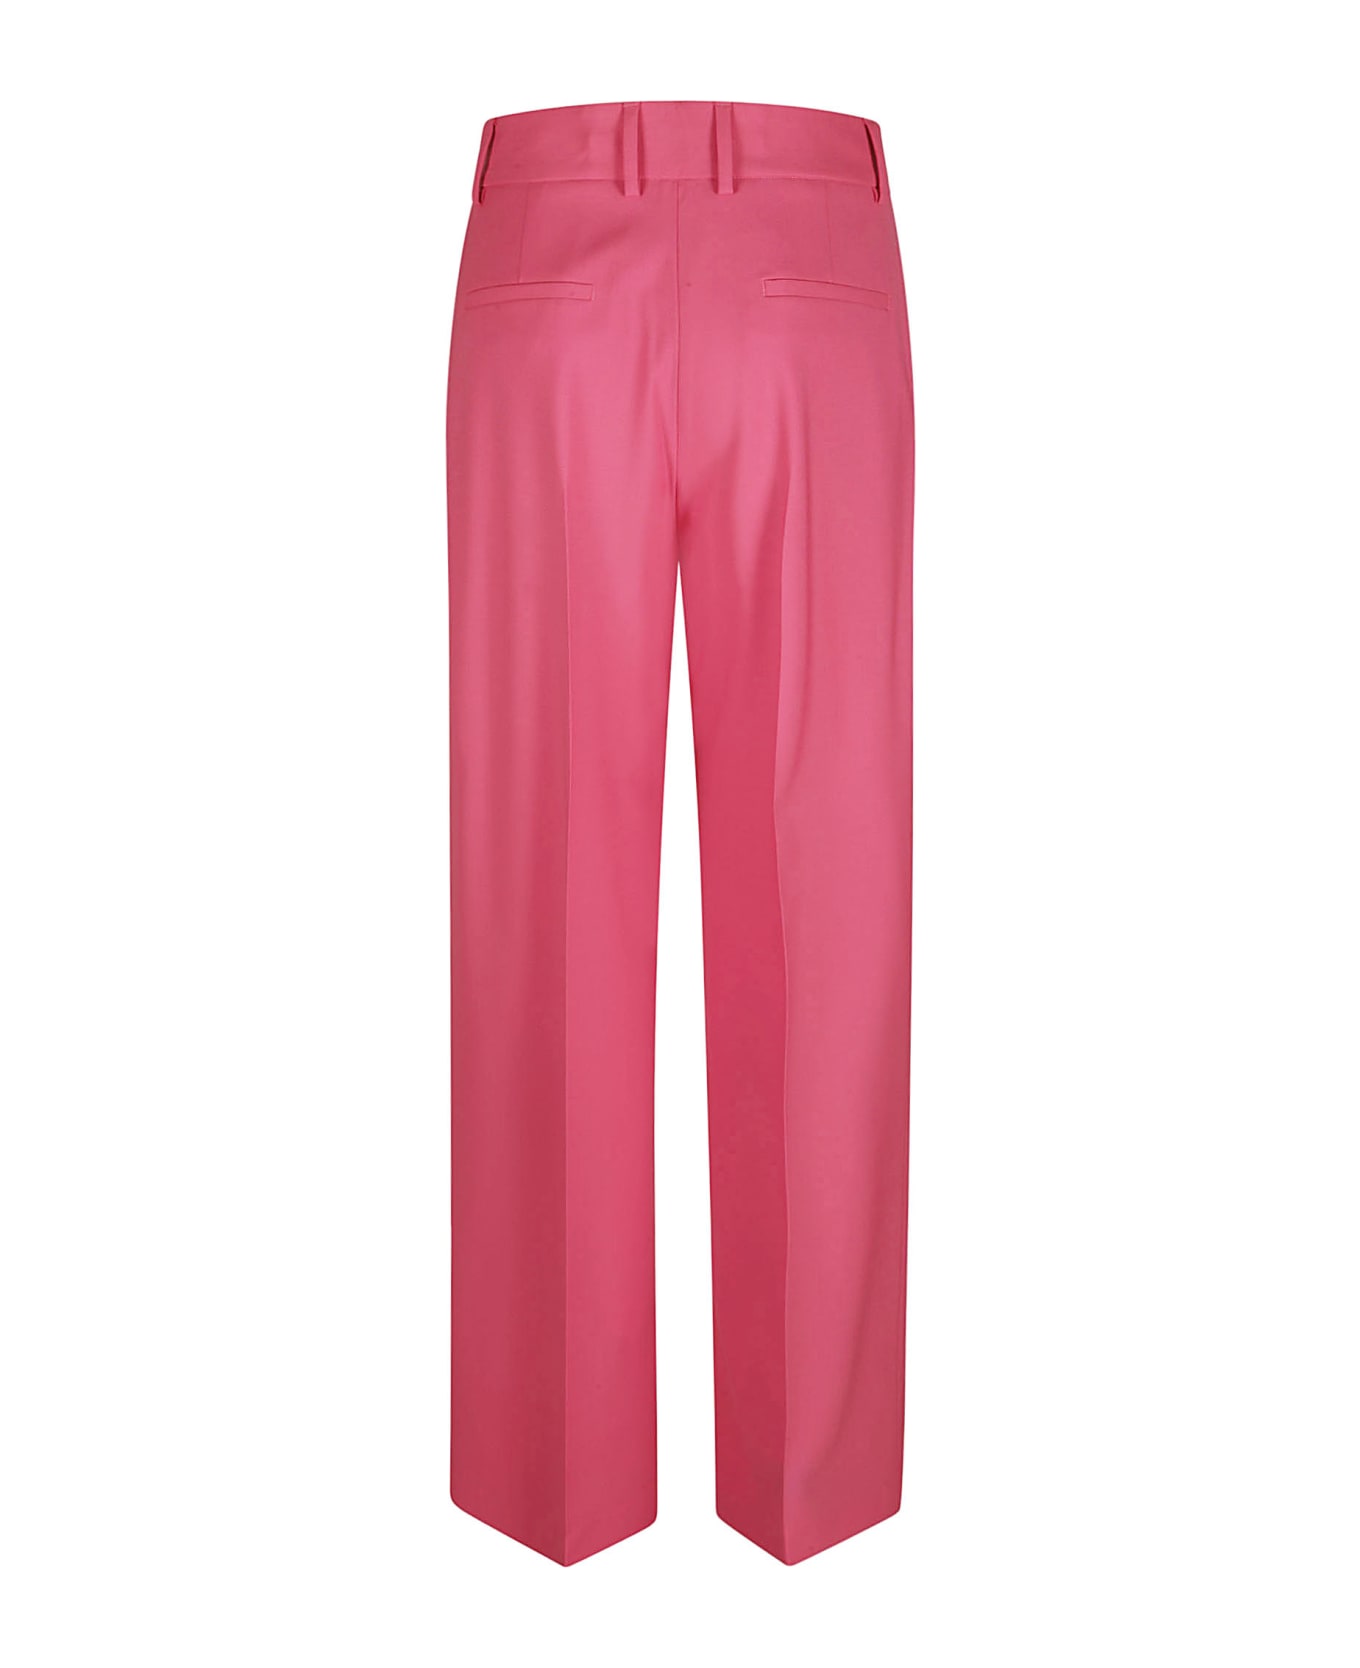 MSGM Concealed Classic Trousers - Pink ボトムス